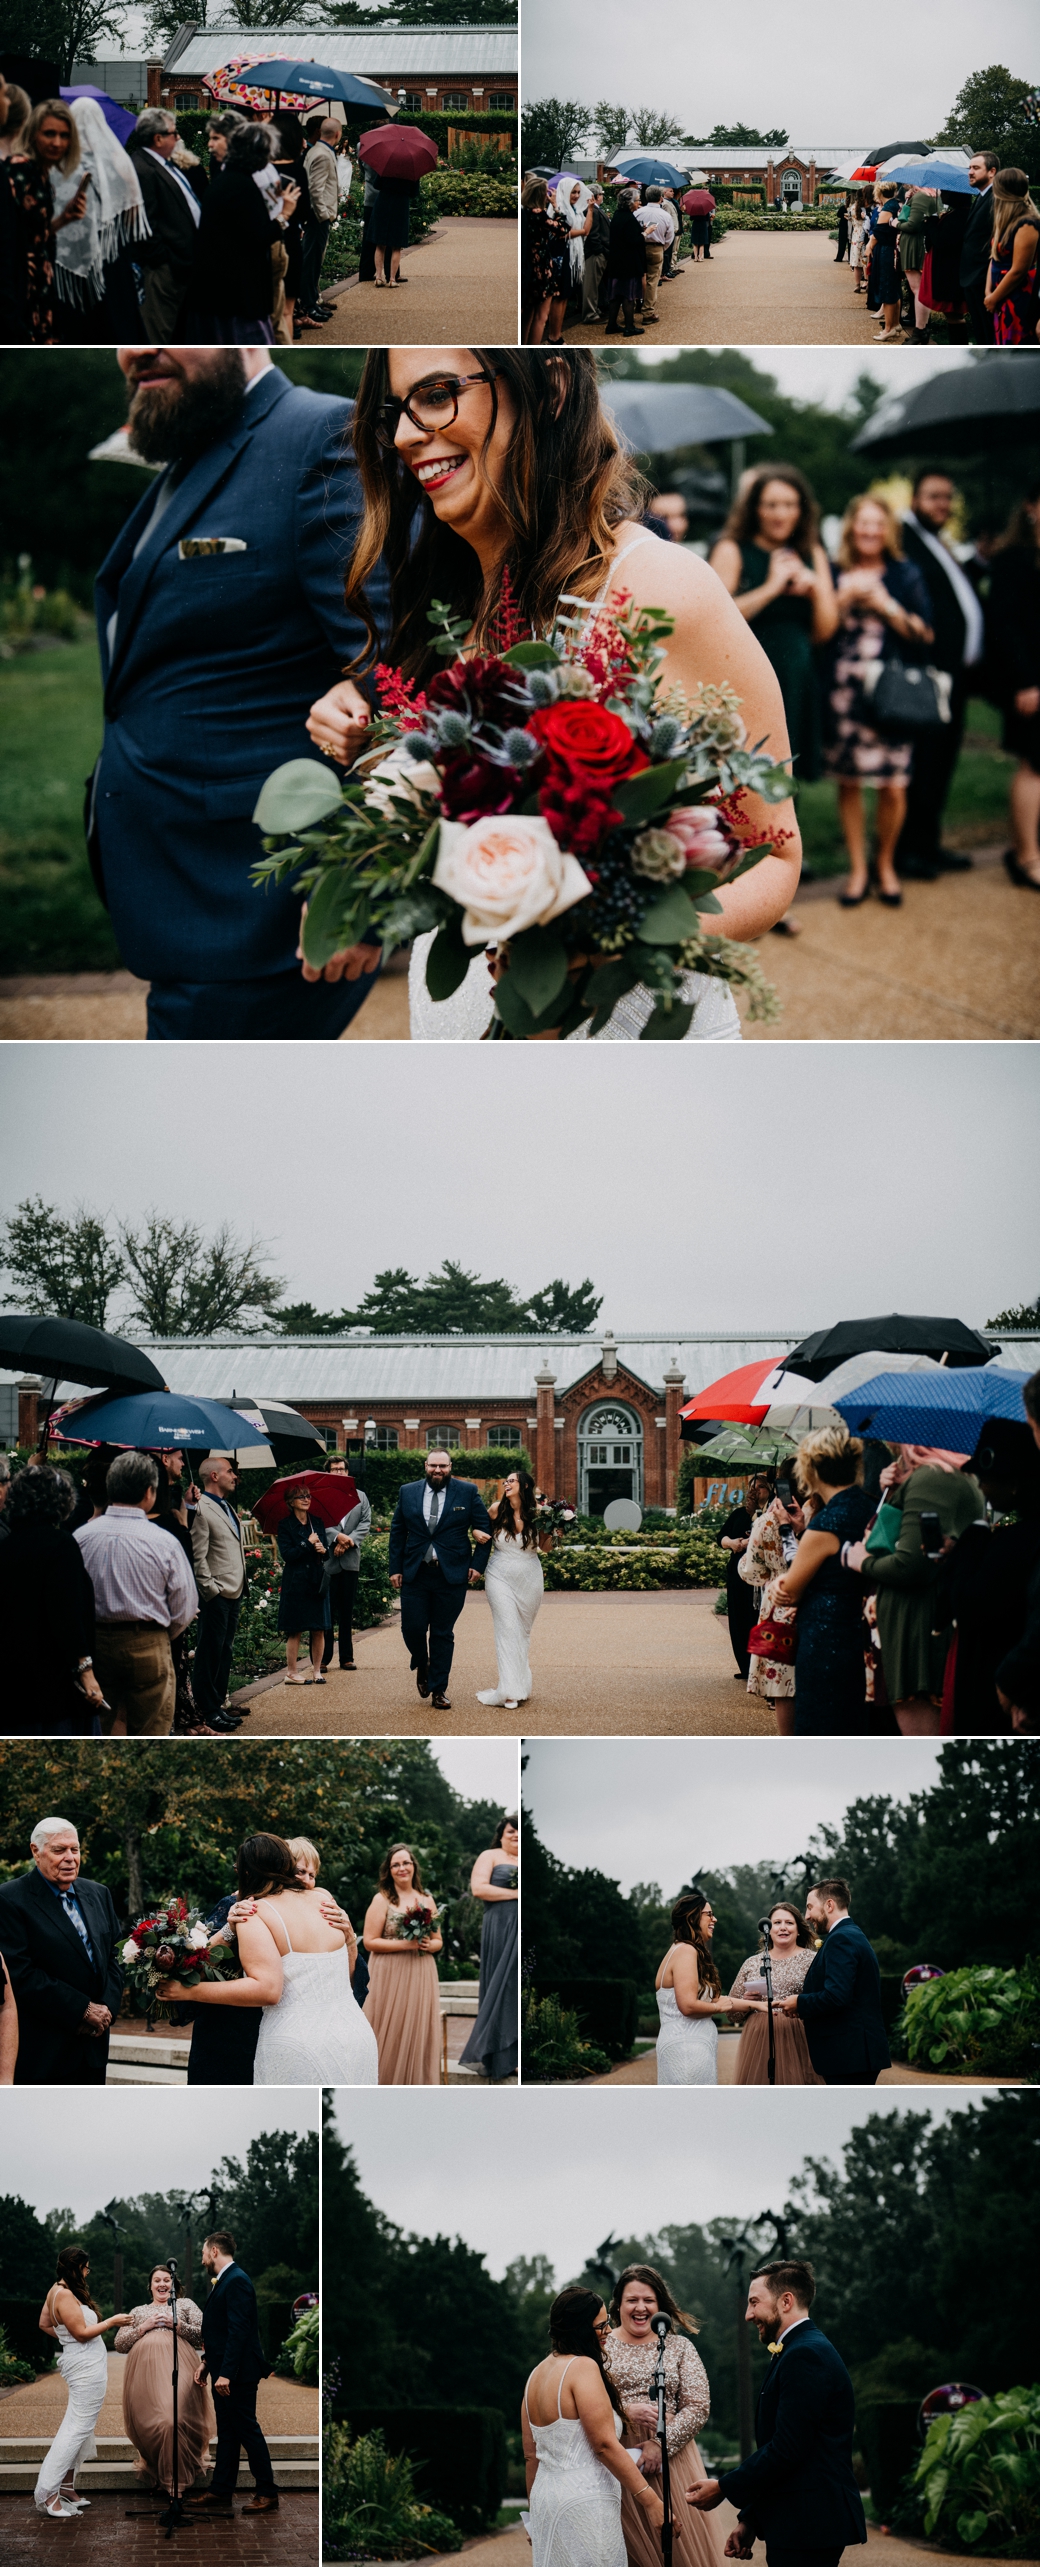 Collage of photos of guests holding umbrellas as they watch a Rainy Day Wedding ceremony in St Louis at the missouri botanical gardens